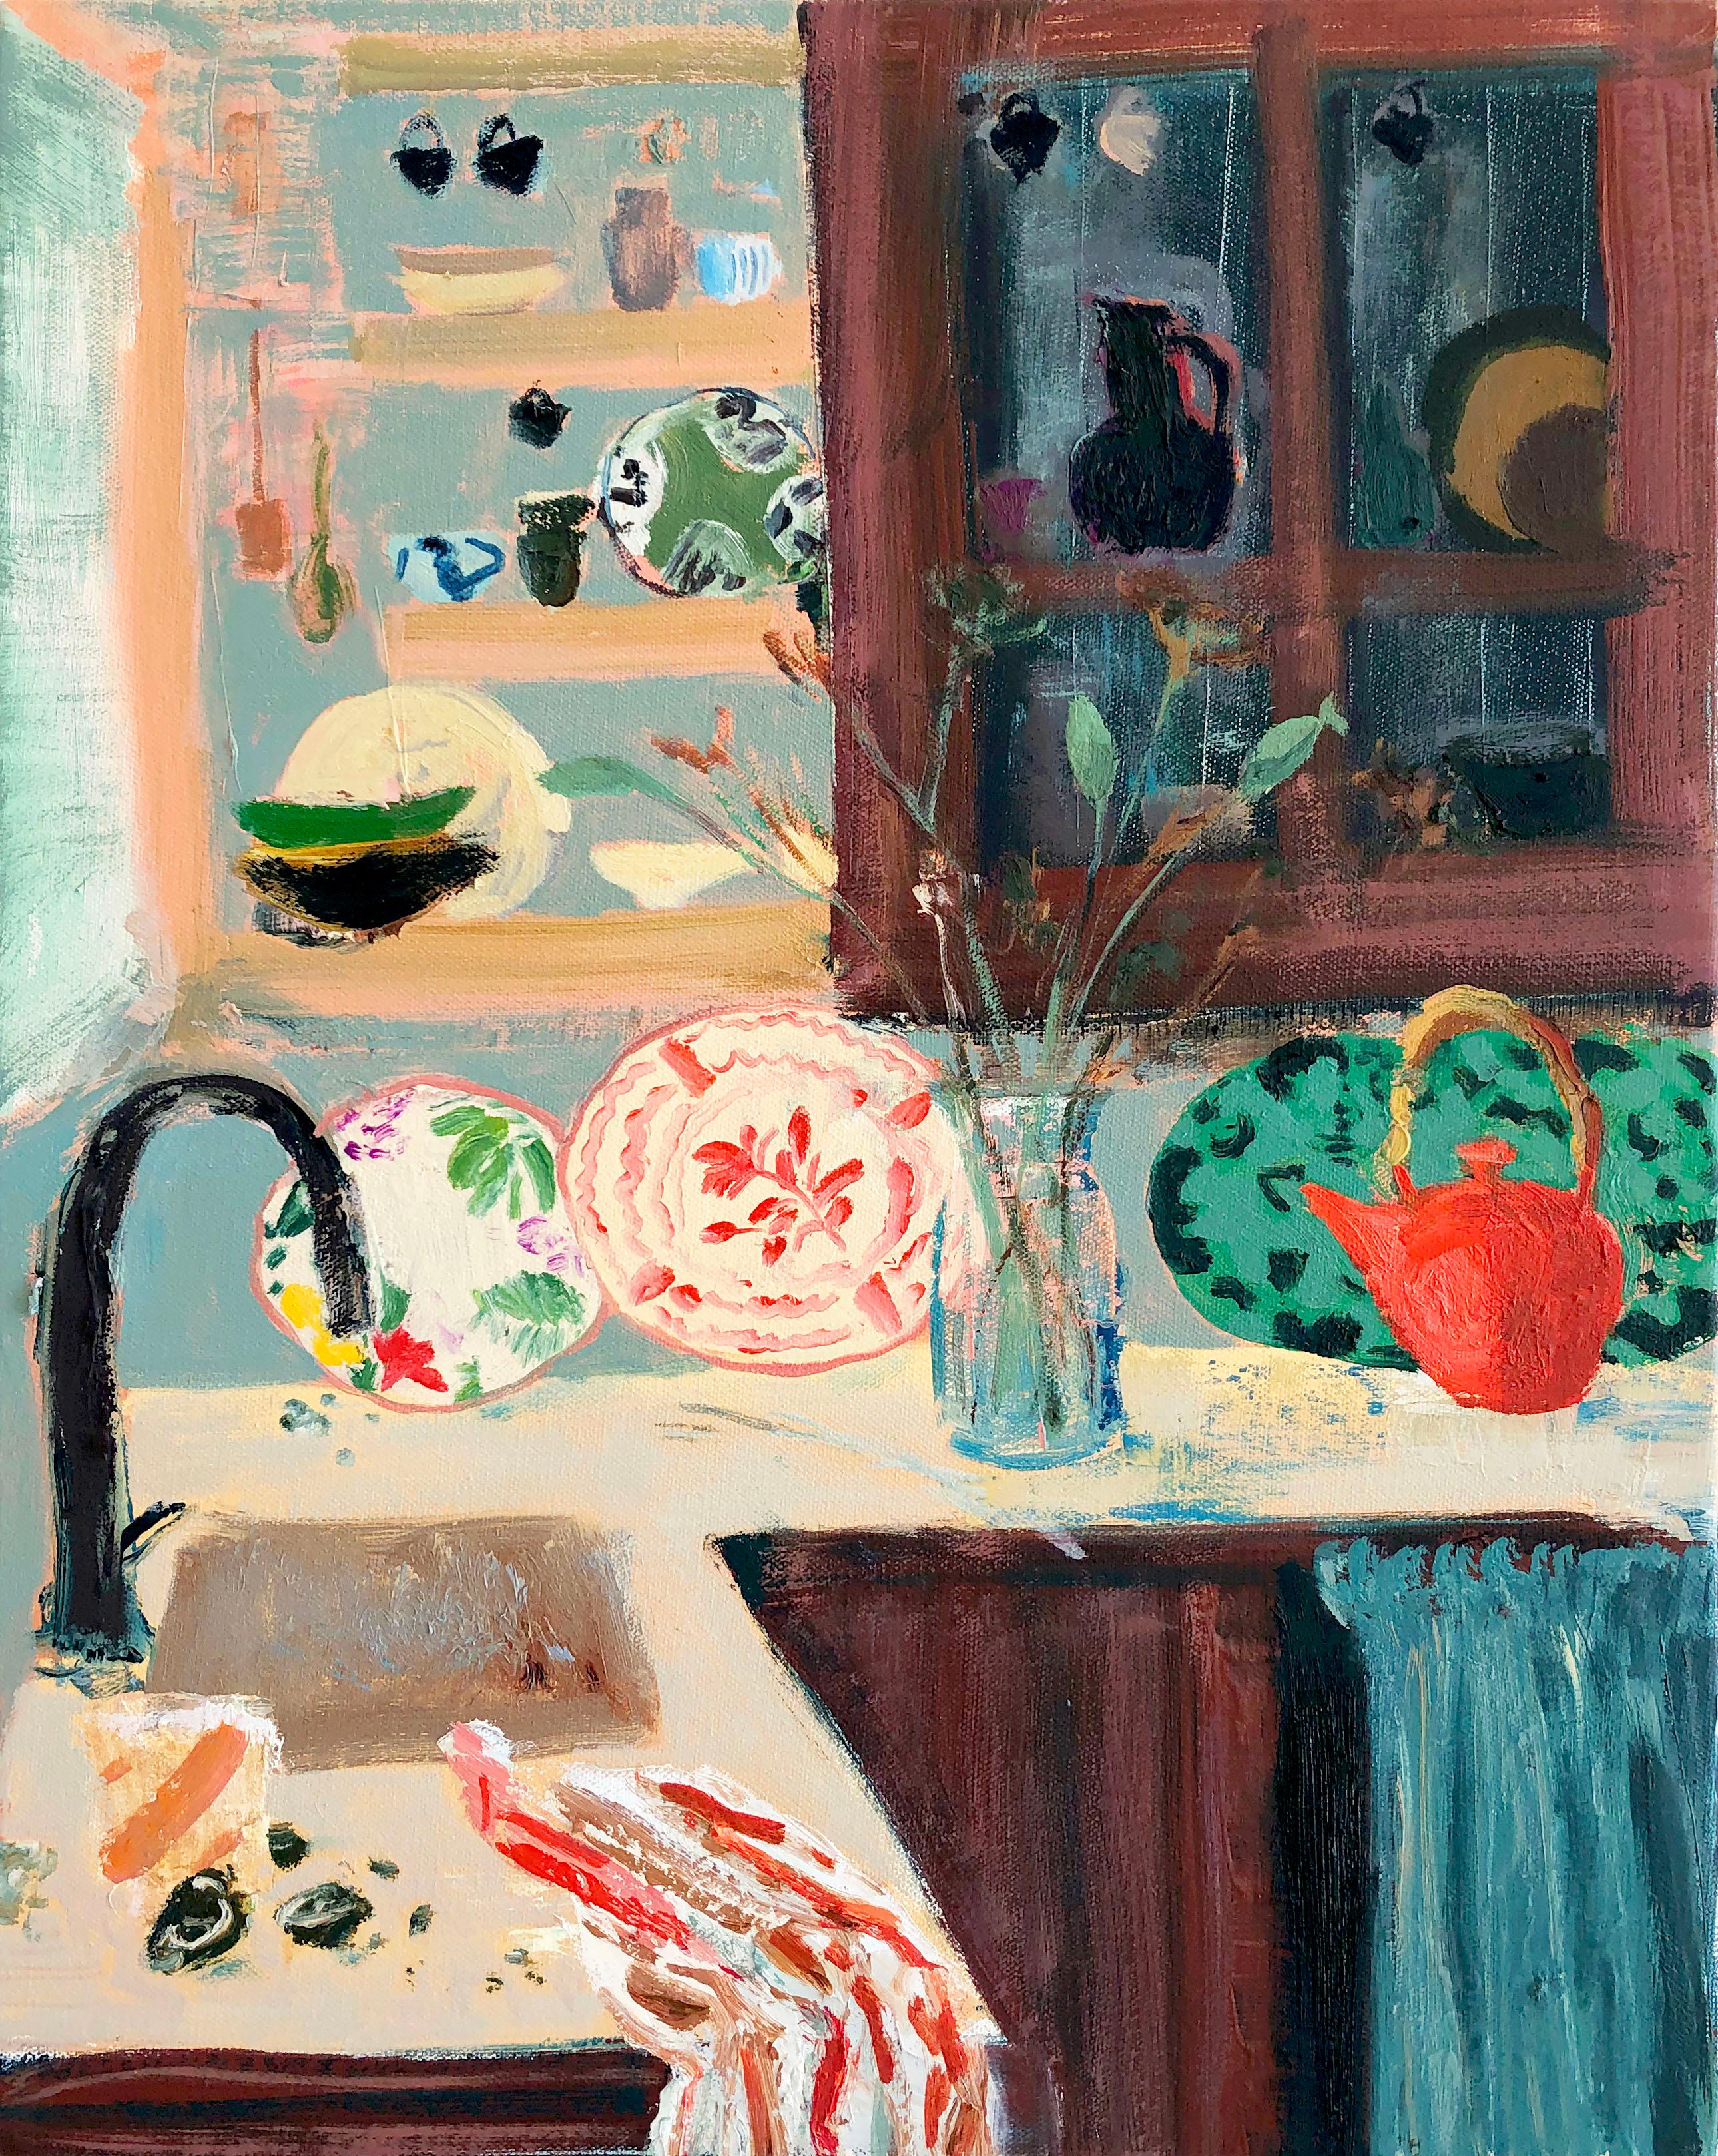 Melanie Parke Interior Painting - Nellie Lake, Kitchen, Patterned Plates, Red Teapot, Teacups, Flowers, Botanical